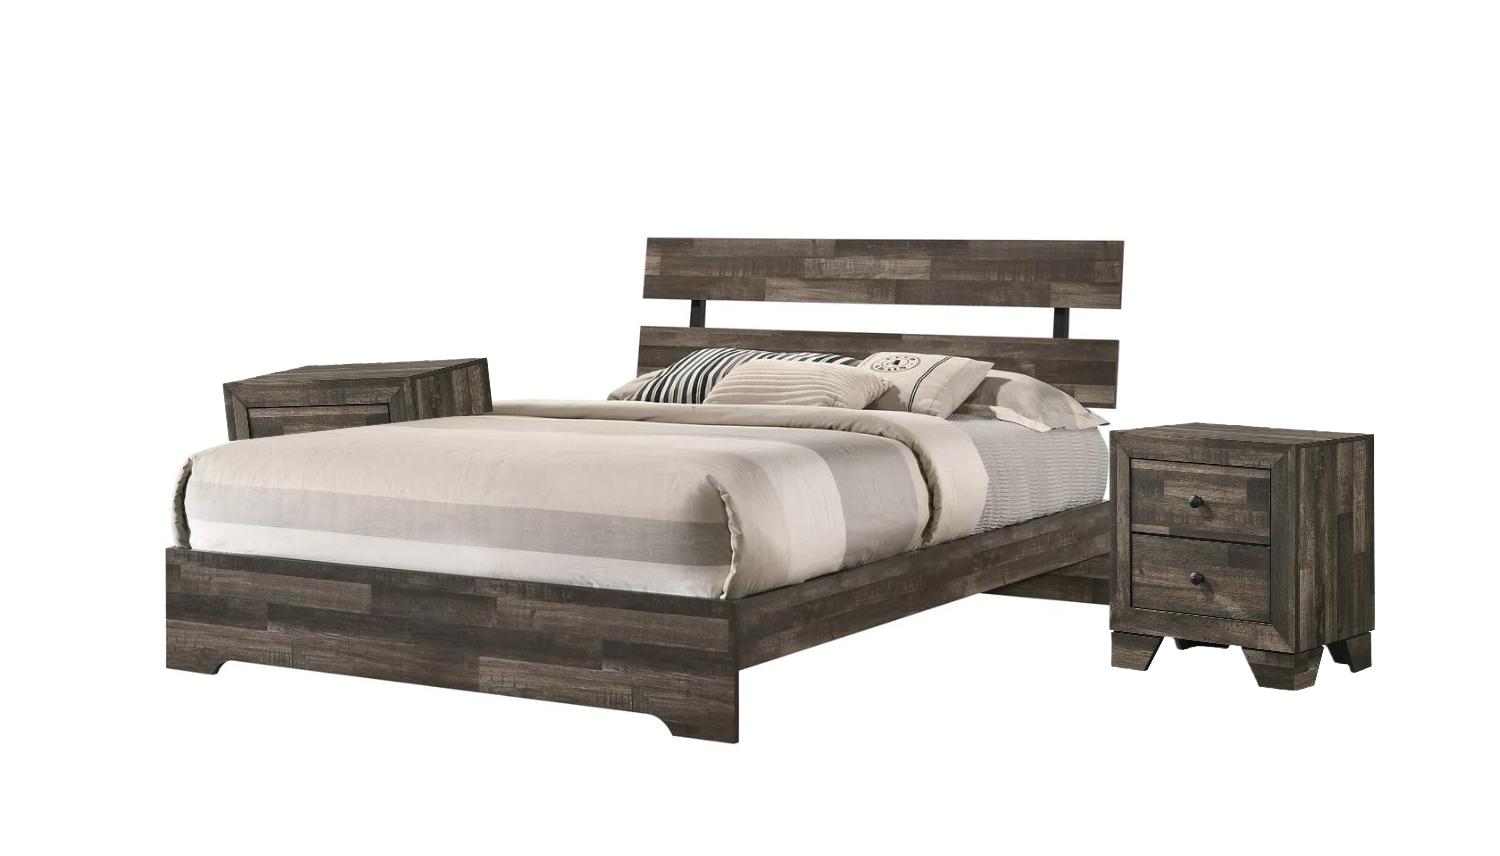 Transitional, Rustic Panel Bedroom Set Atticus B6980-F-Bed-3pcs in Brown 